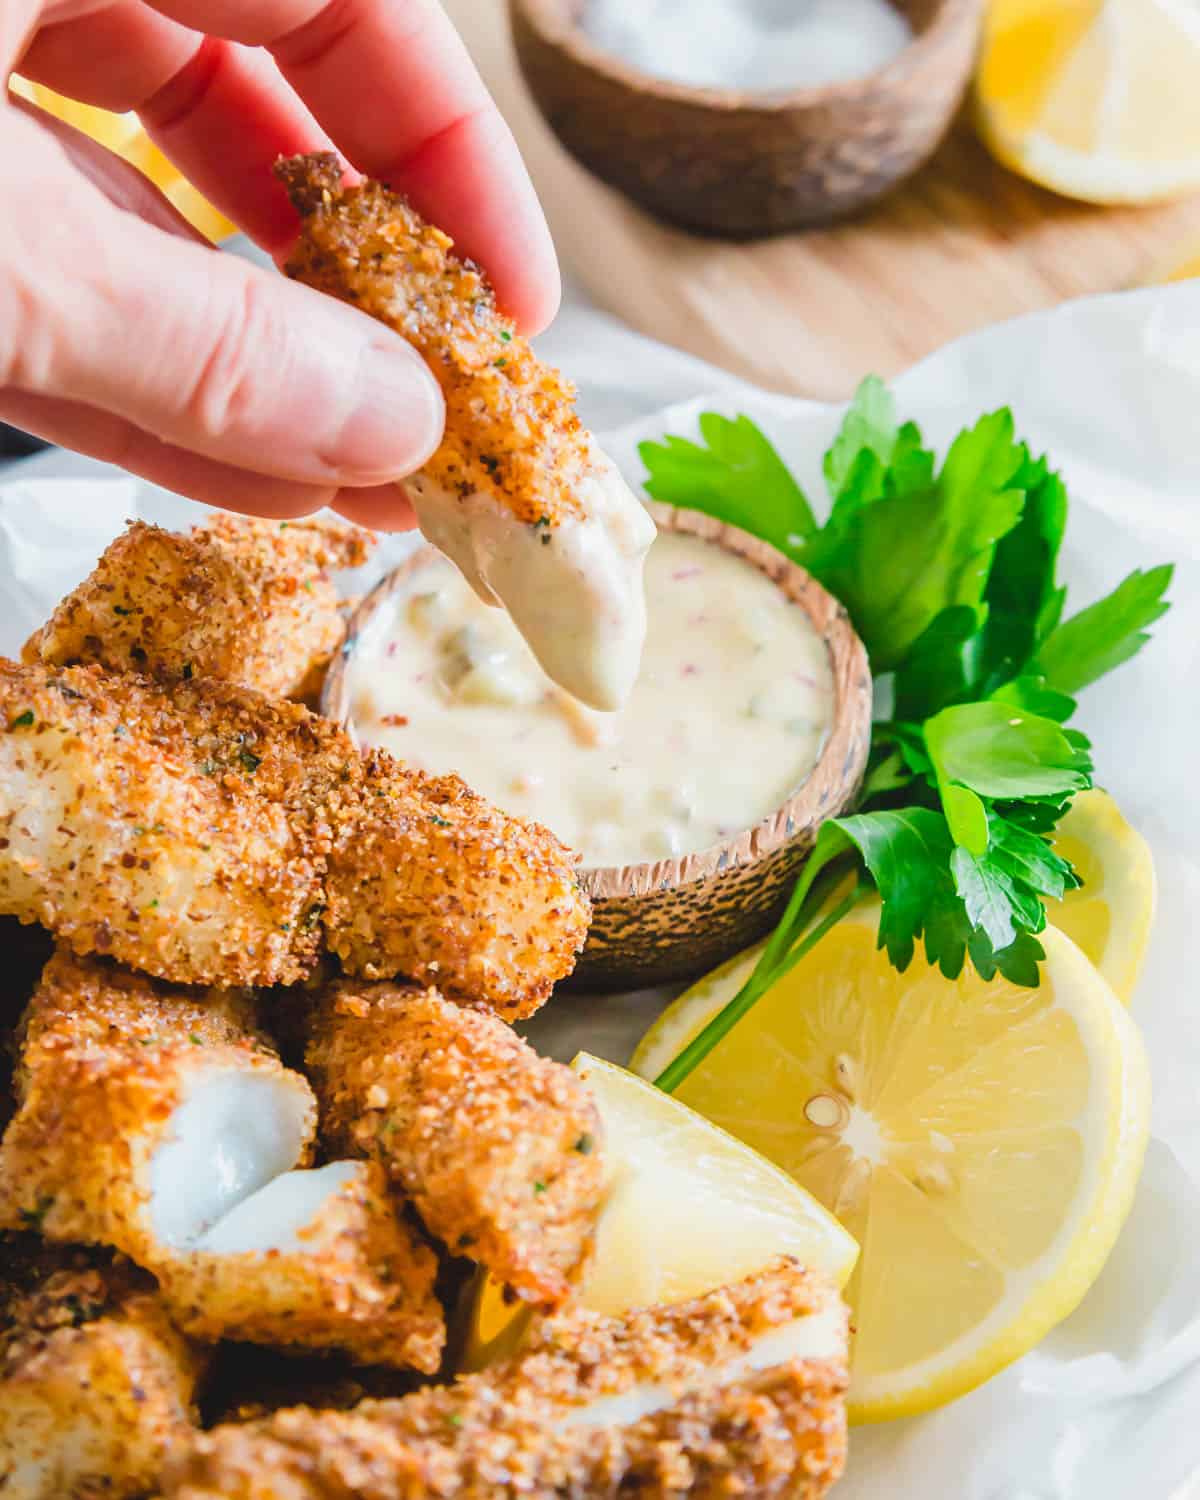 Enjoy these air fried cod fish sticks with a quick dijon remoulade dipping sauce.